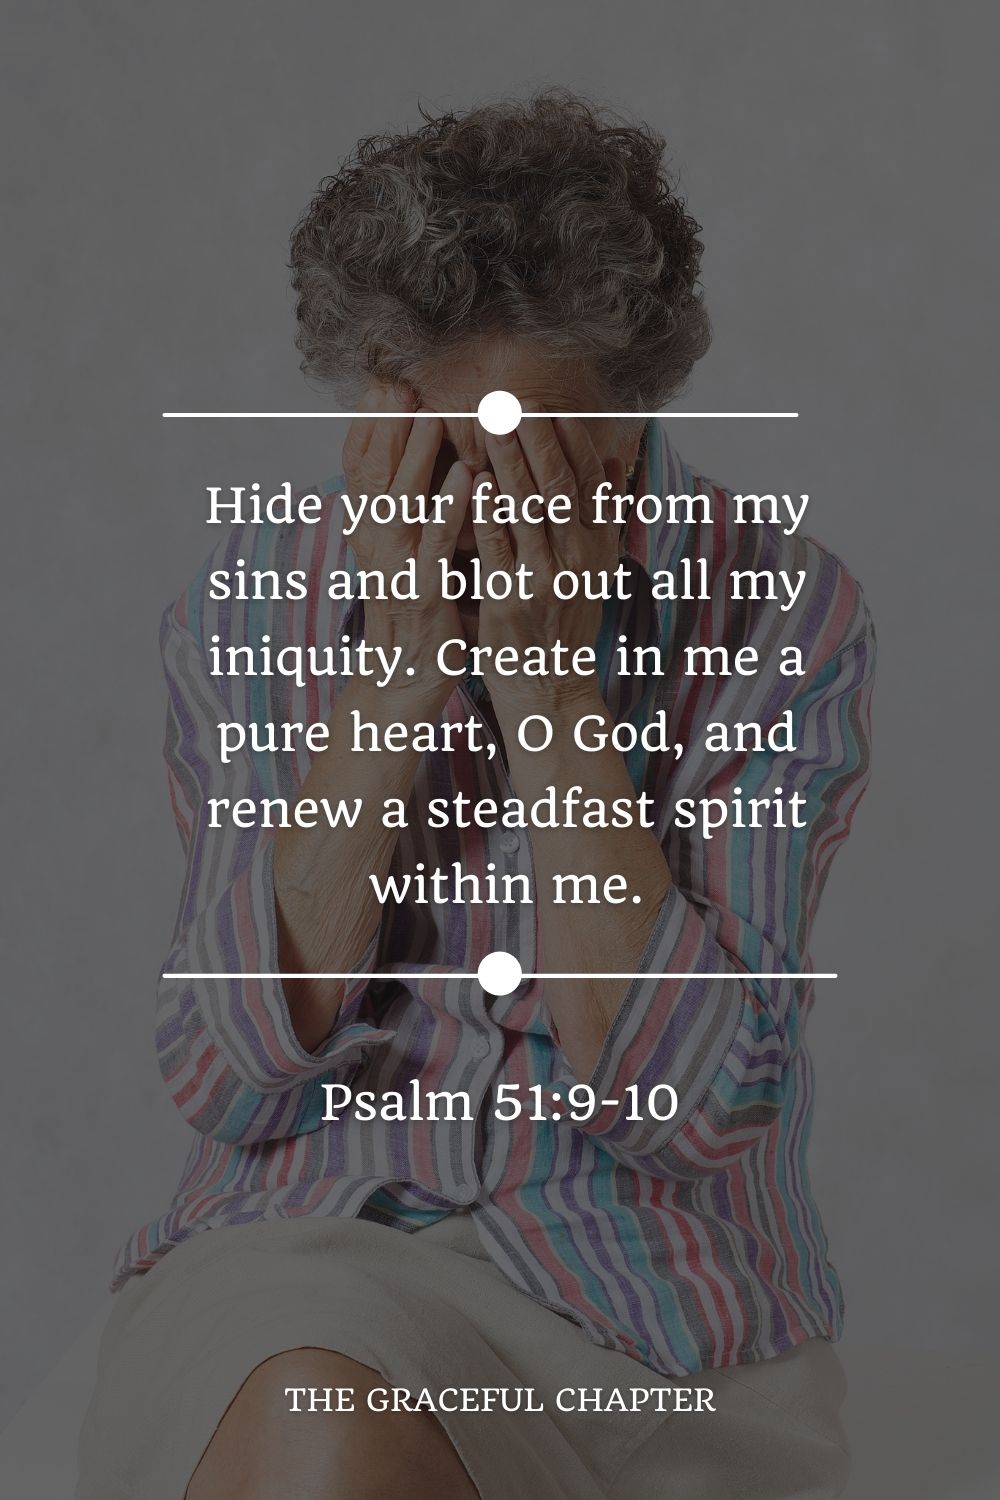 Hide your face from my sins and blot out all my iniquity. Create in me a pure heart, O God, and renew a steadfast spirit within me. Psalm 51:9-10